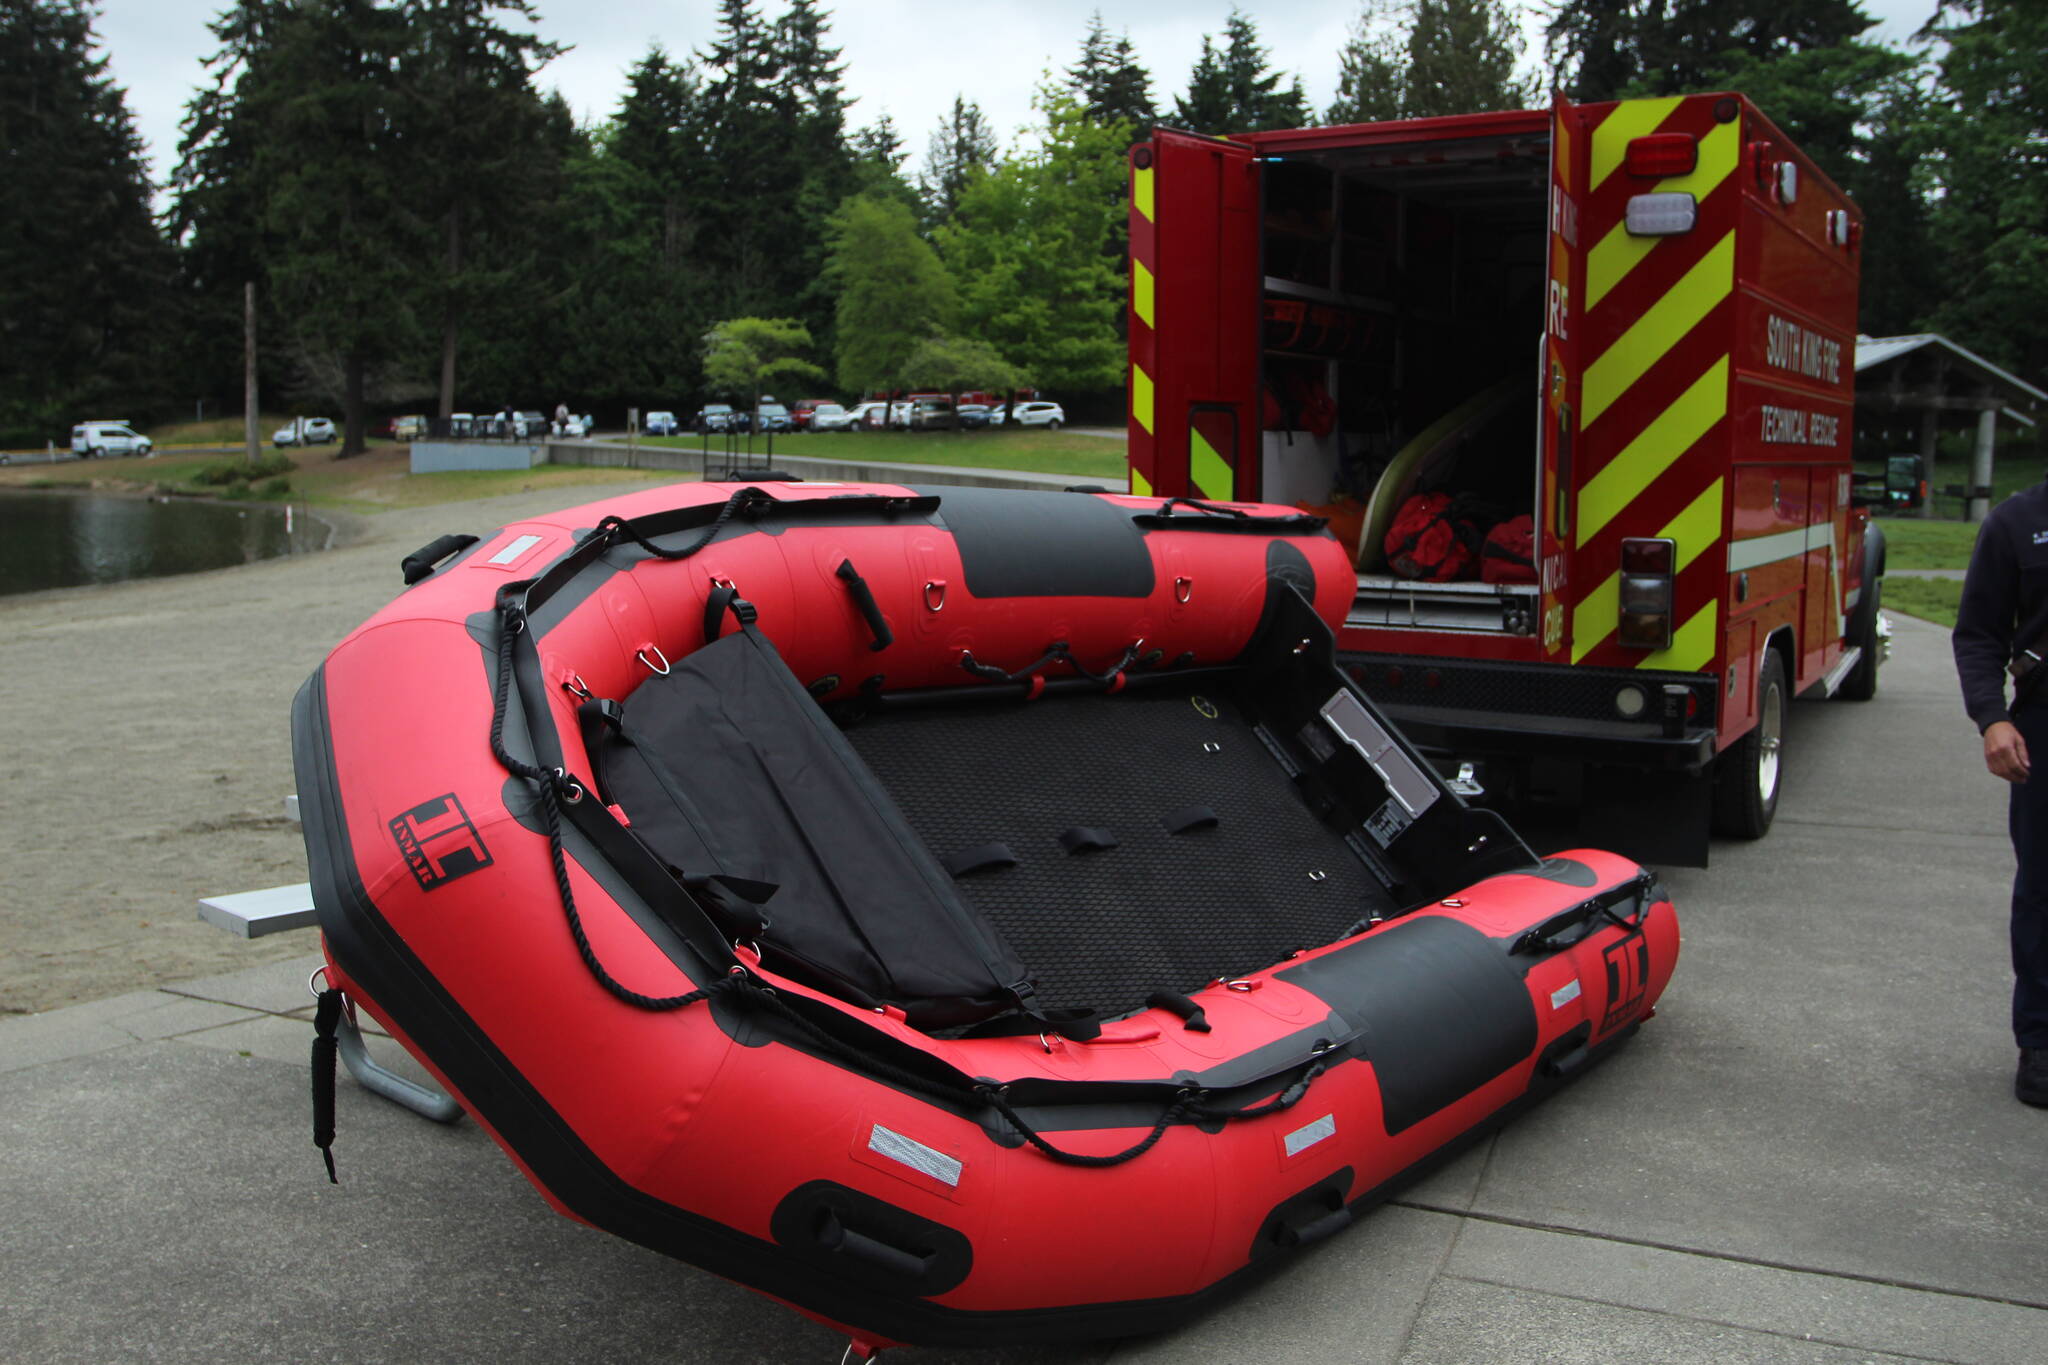 South King Fire and Rescue’s new inflatable rescue boat is intended for inland water rescues, such as lakes or rivers. Olivia Sullivan / The Mirror